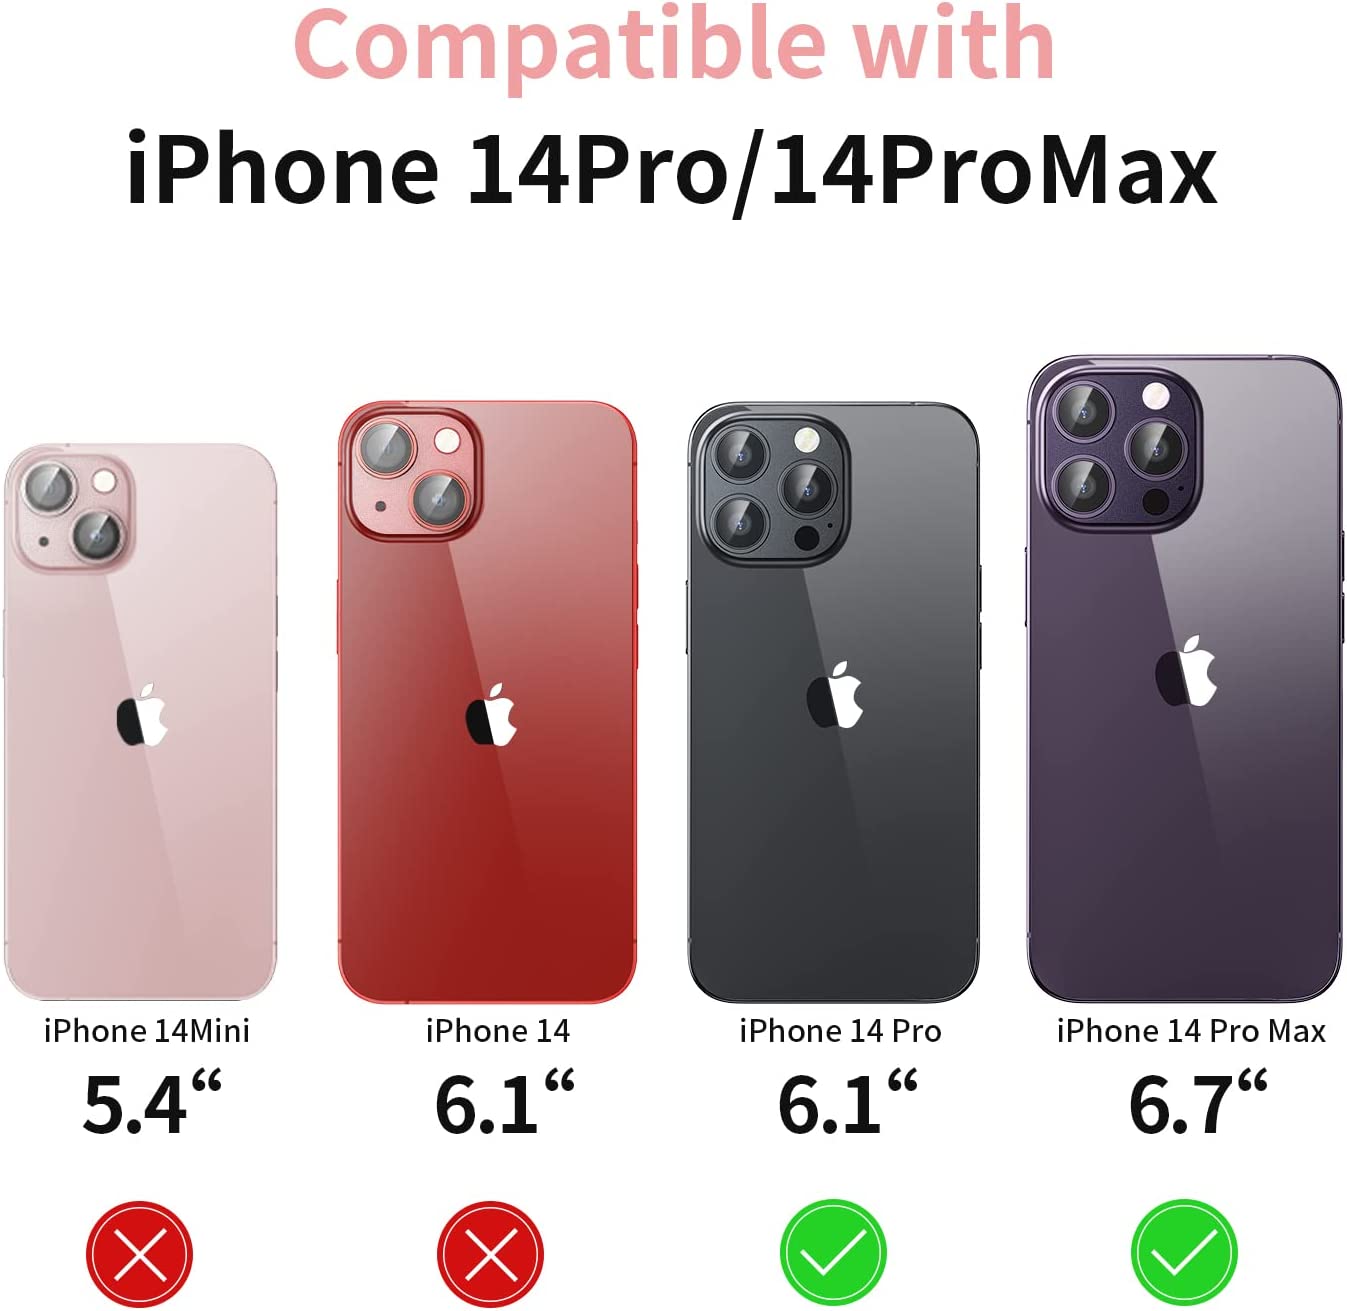 Mansoorr Camera Lens Protector for iPhone 14 Pro/iPhone 14 Pro Max - Purple 2 Pack